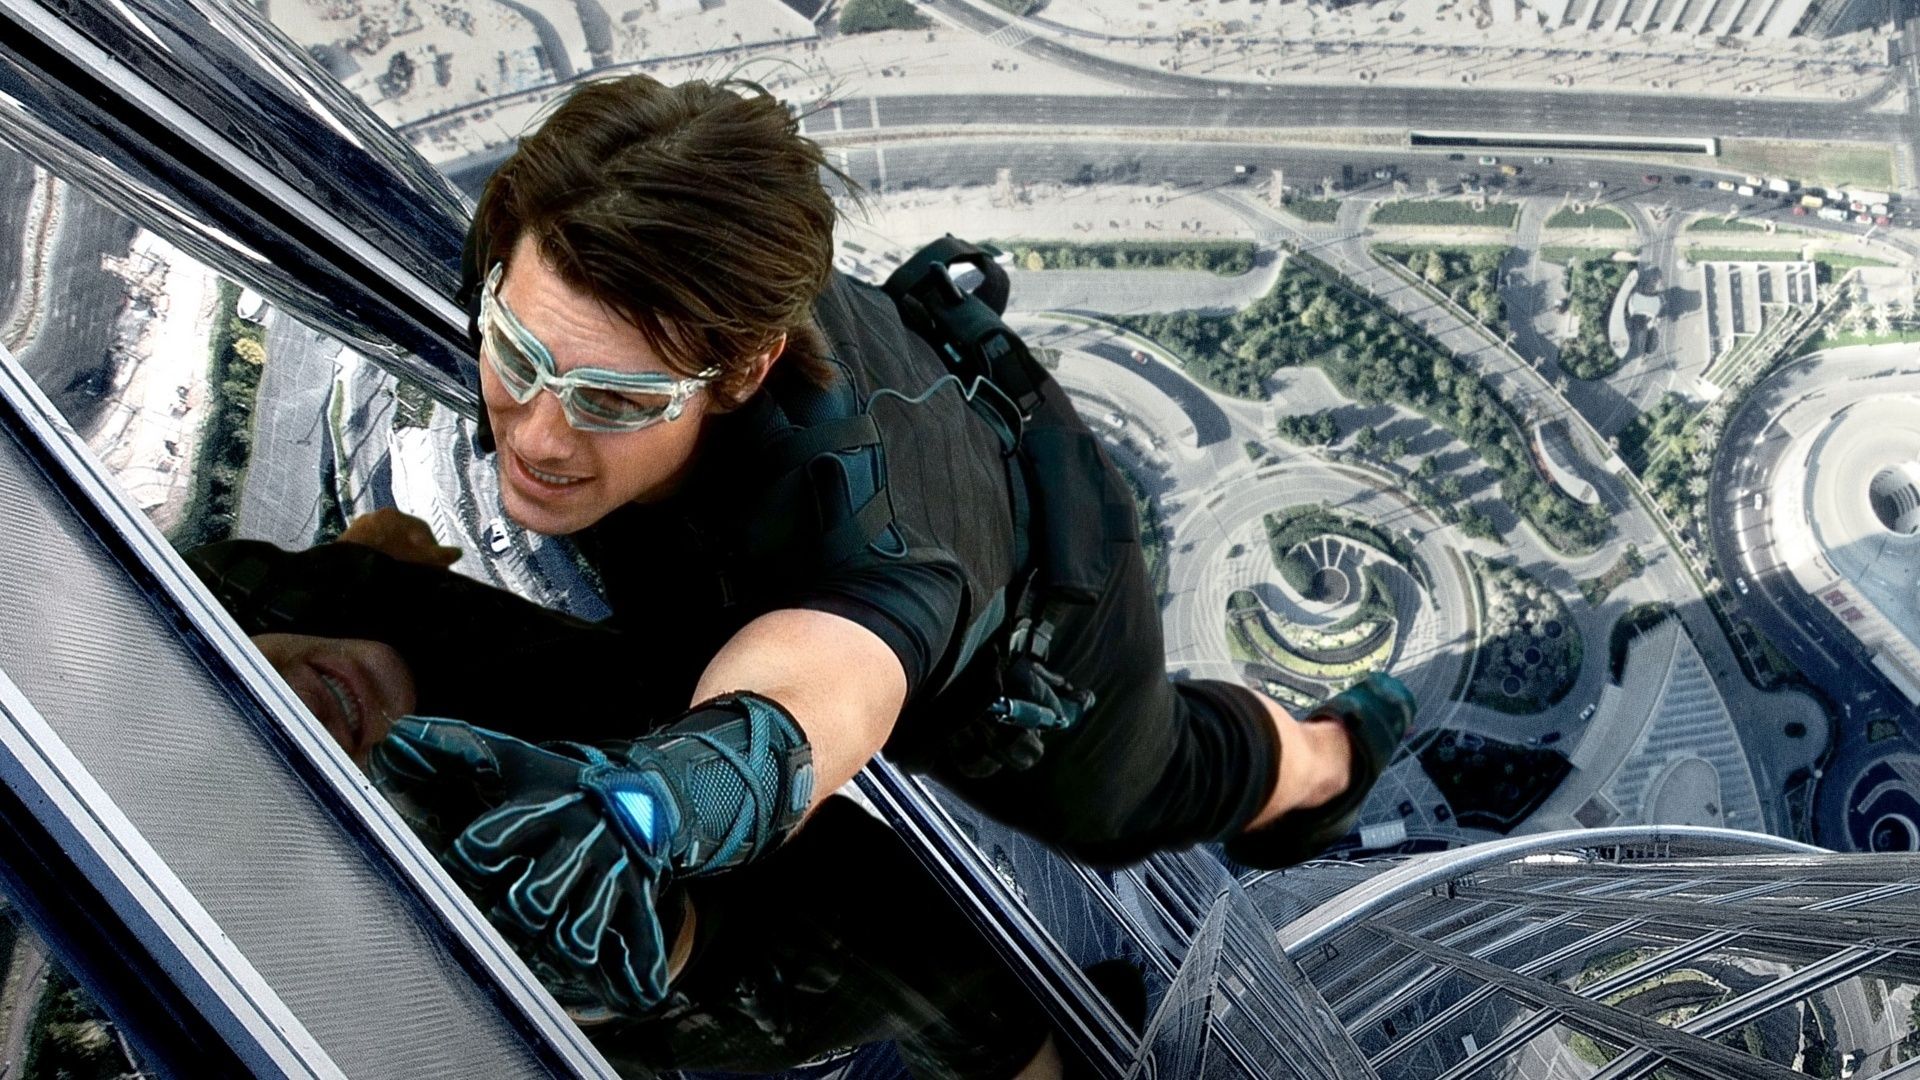 The Definitive Ranking Of The Mission: Impossible Movies